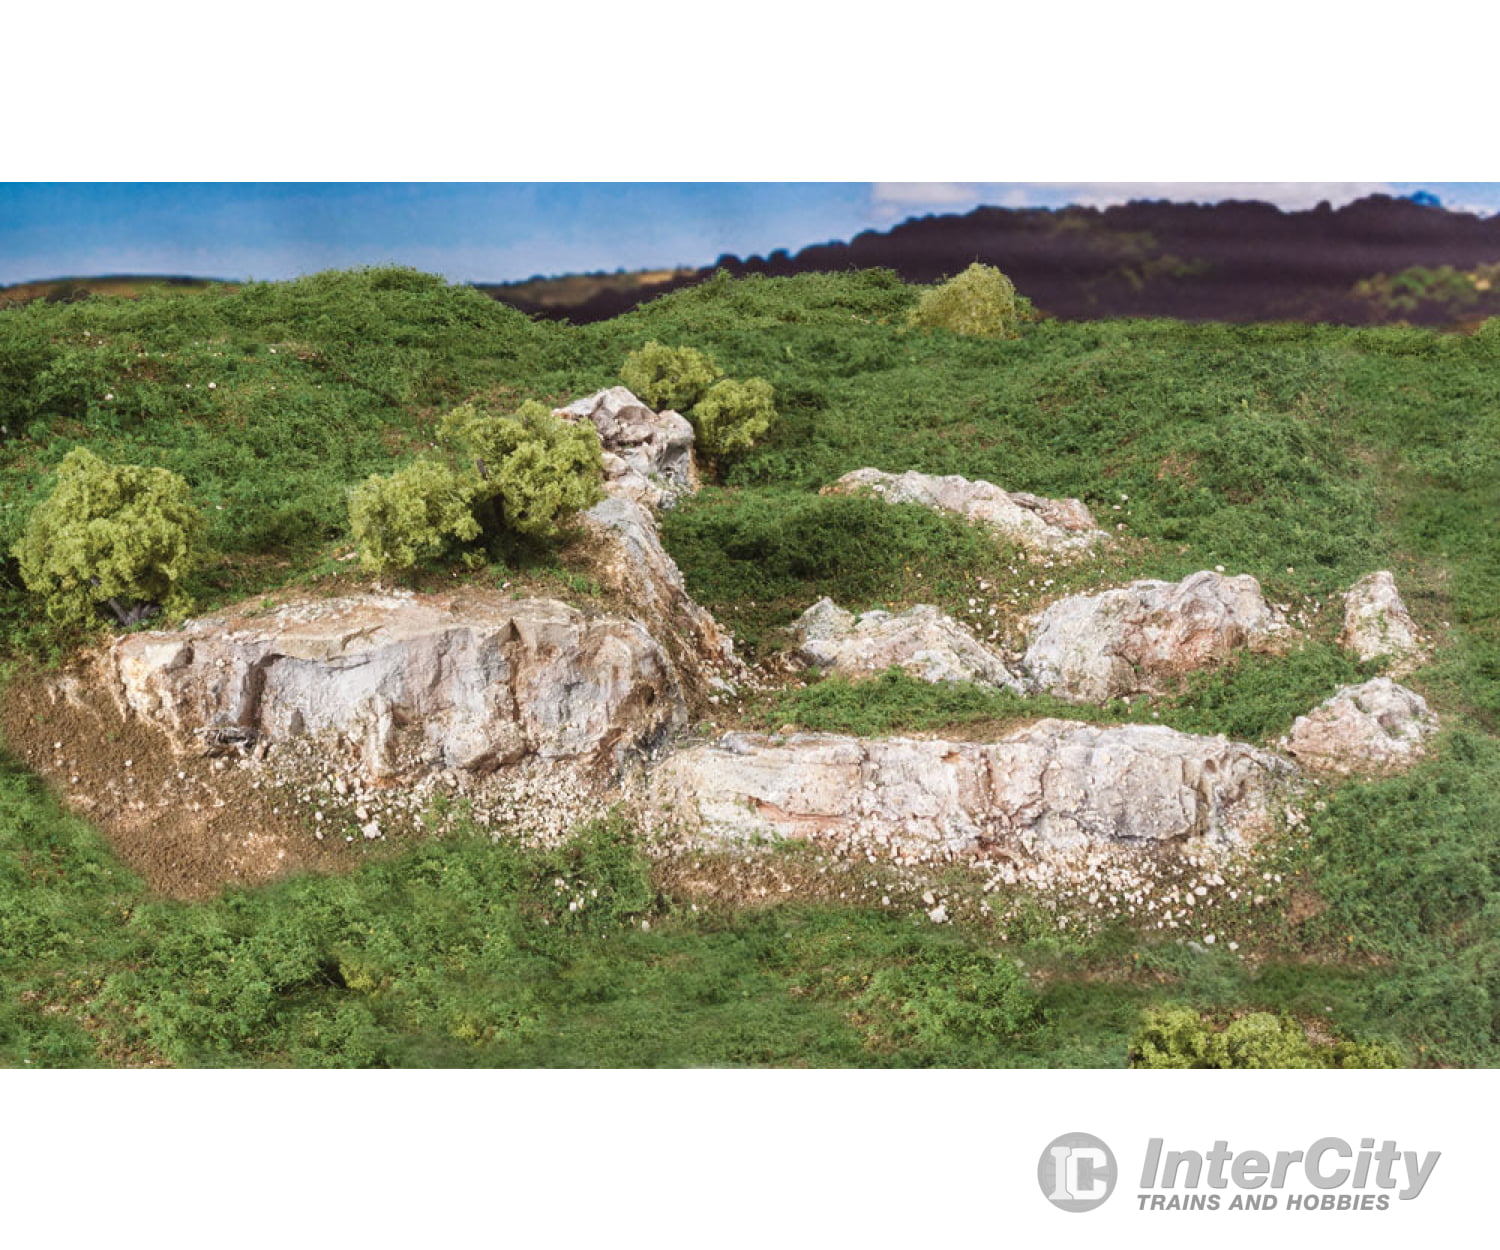 Woodland Scenics 1139 Ready Rocks - Outcropping & Landforms